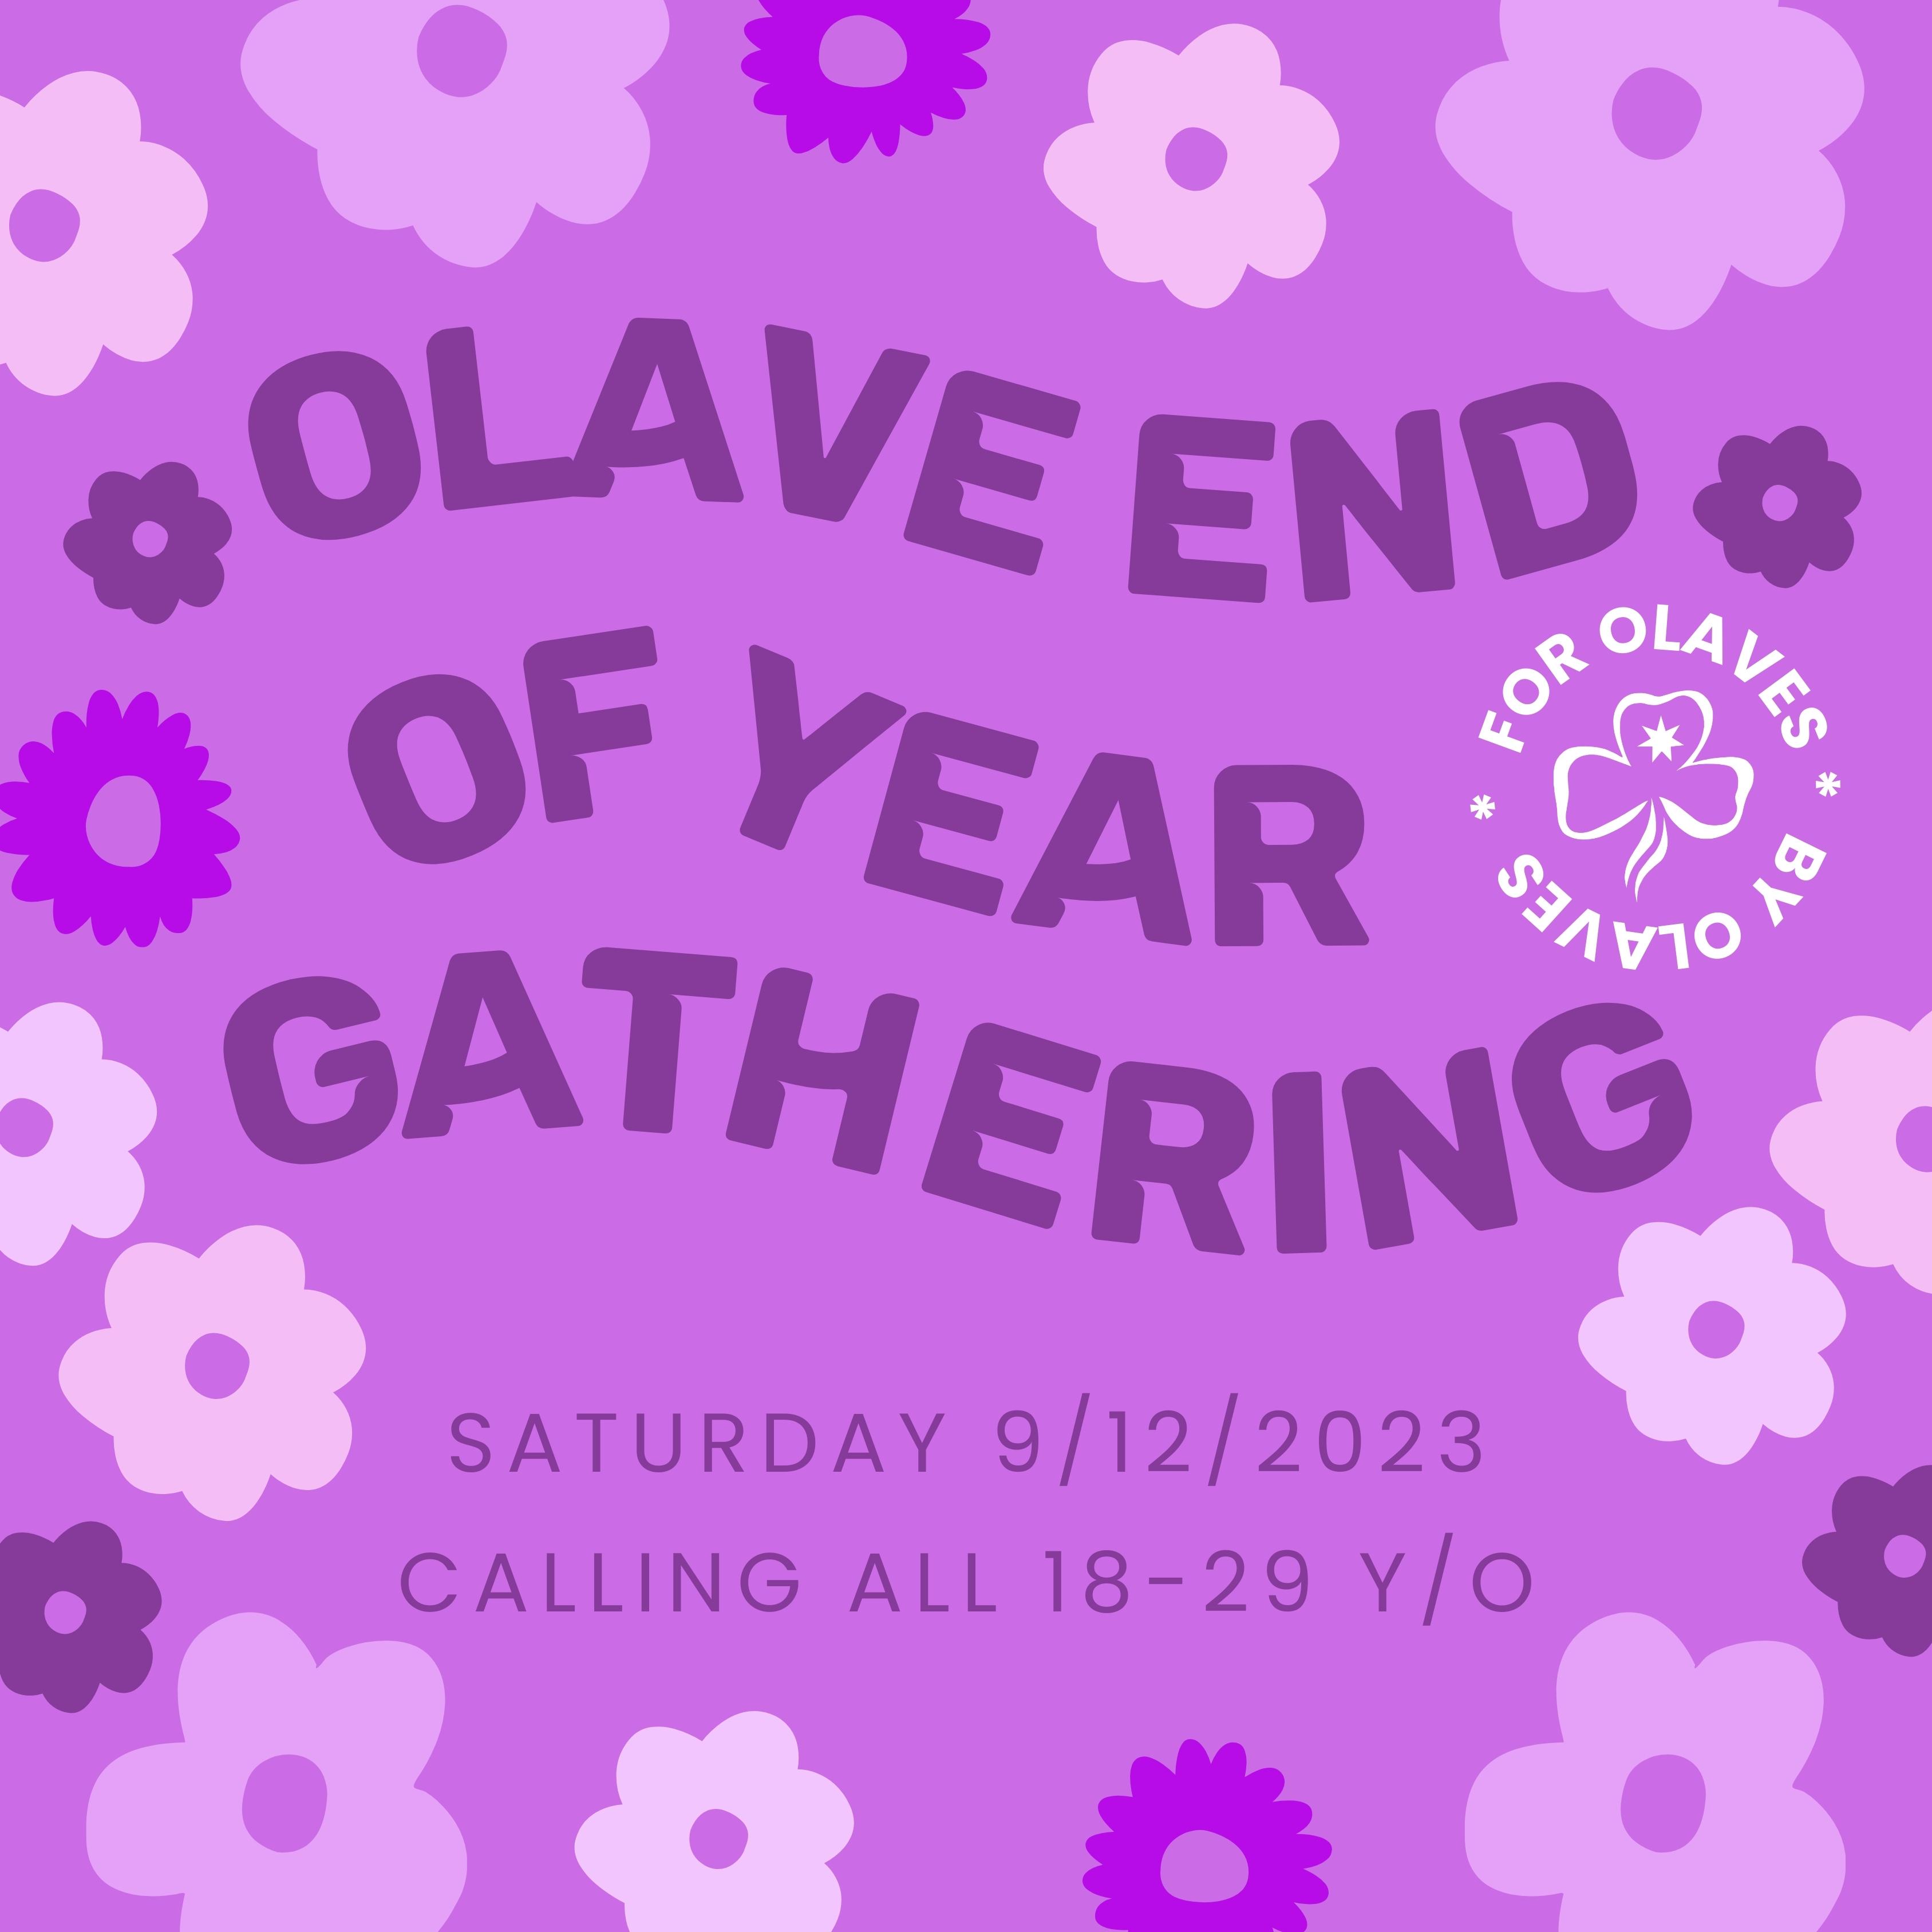 Olave End of Year Gathering 2023